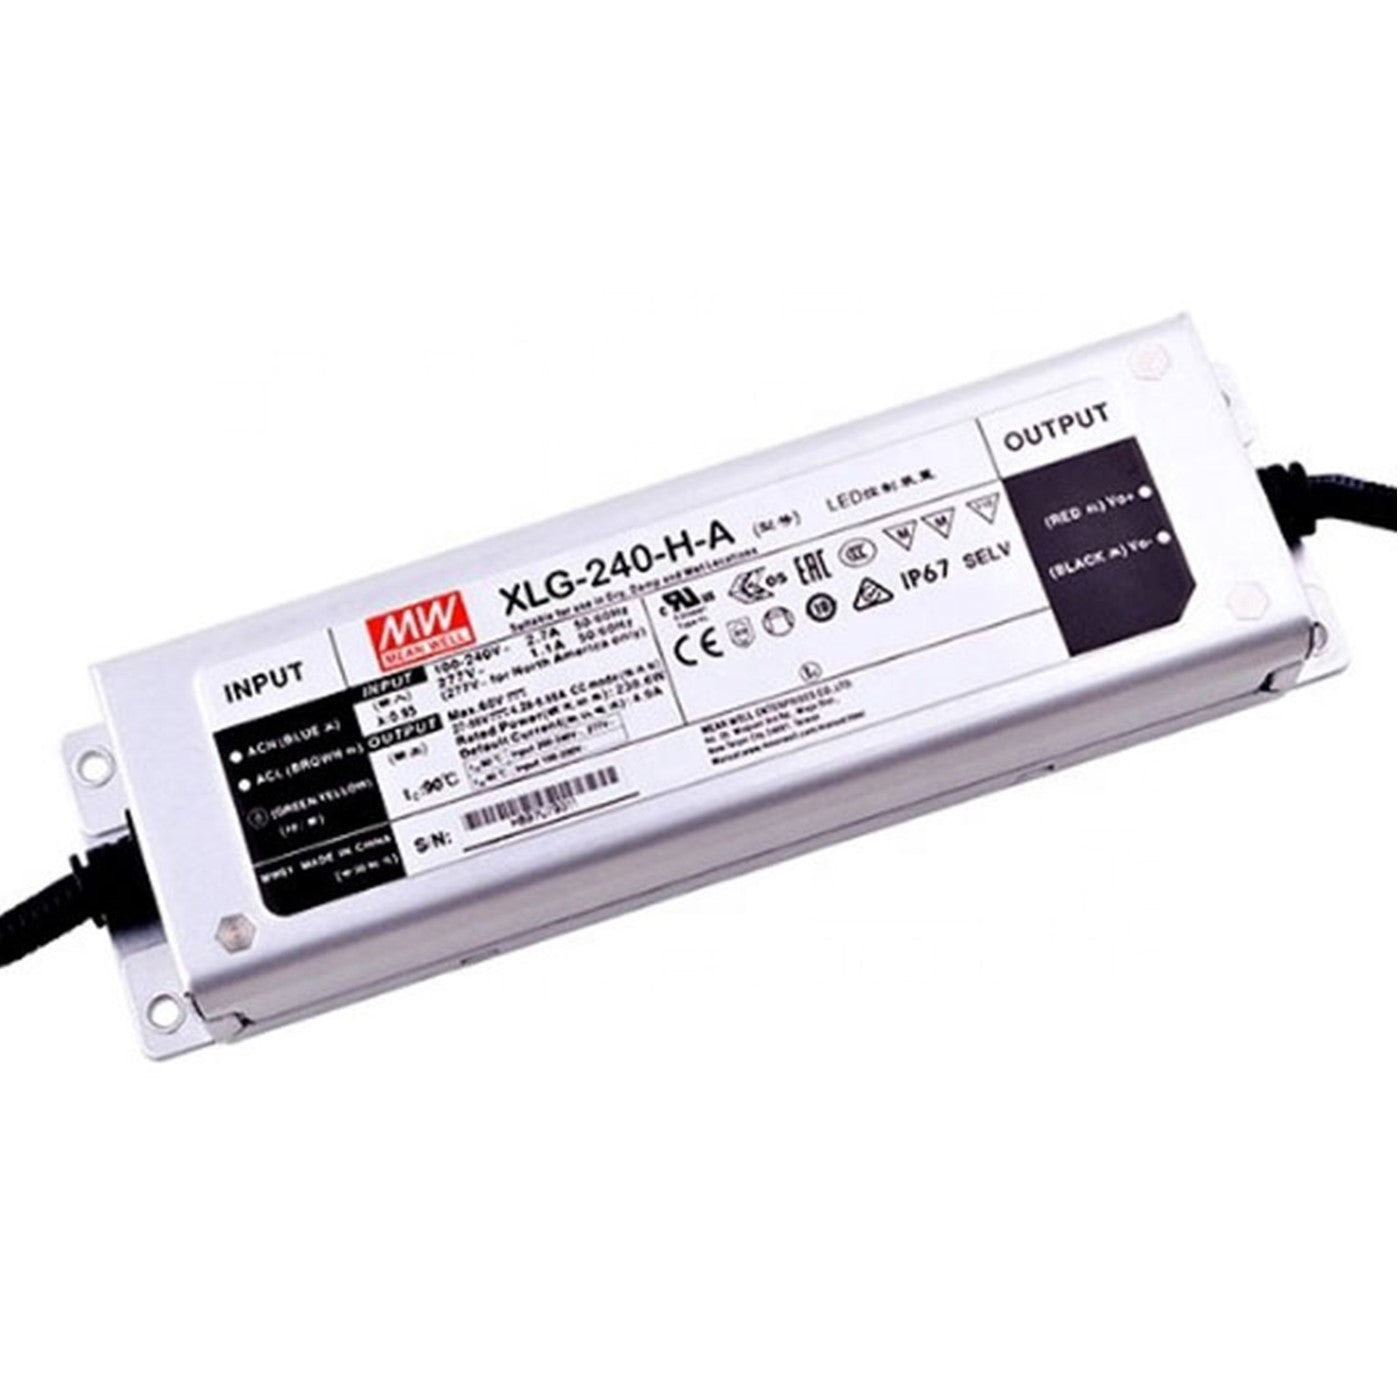 Mean well 27-56vx4.9a Constant Current with output Current adjustment XLG-240I-H-A IP67